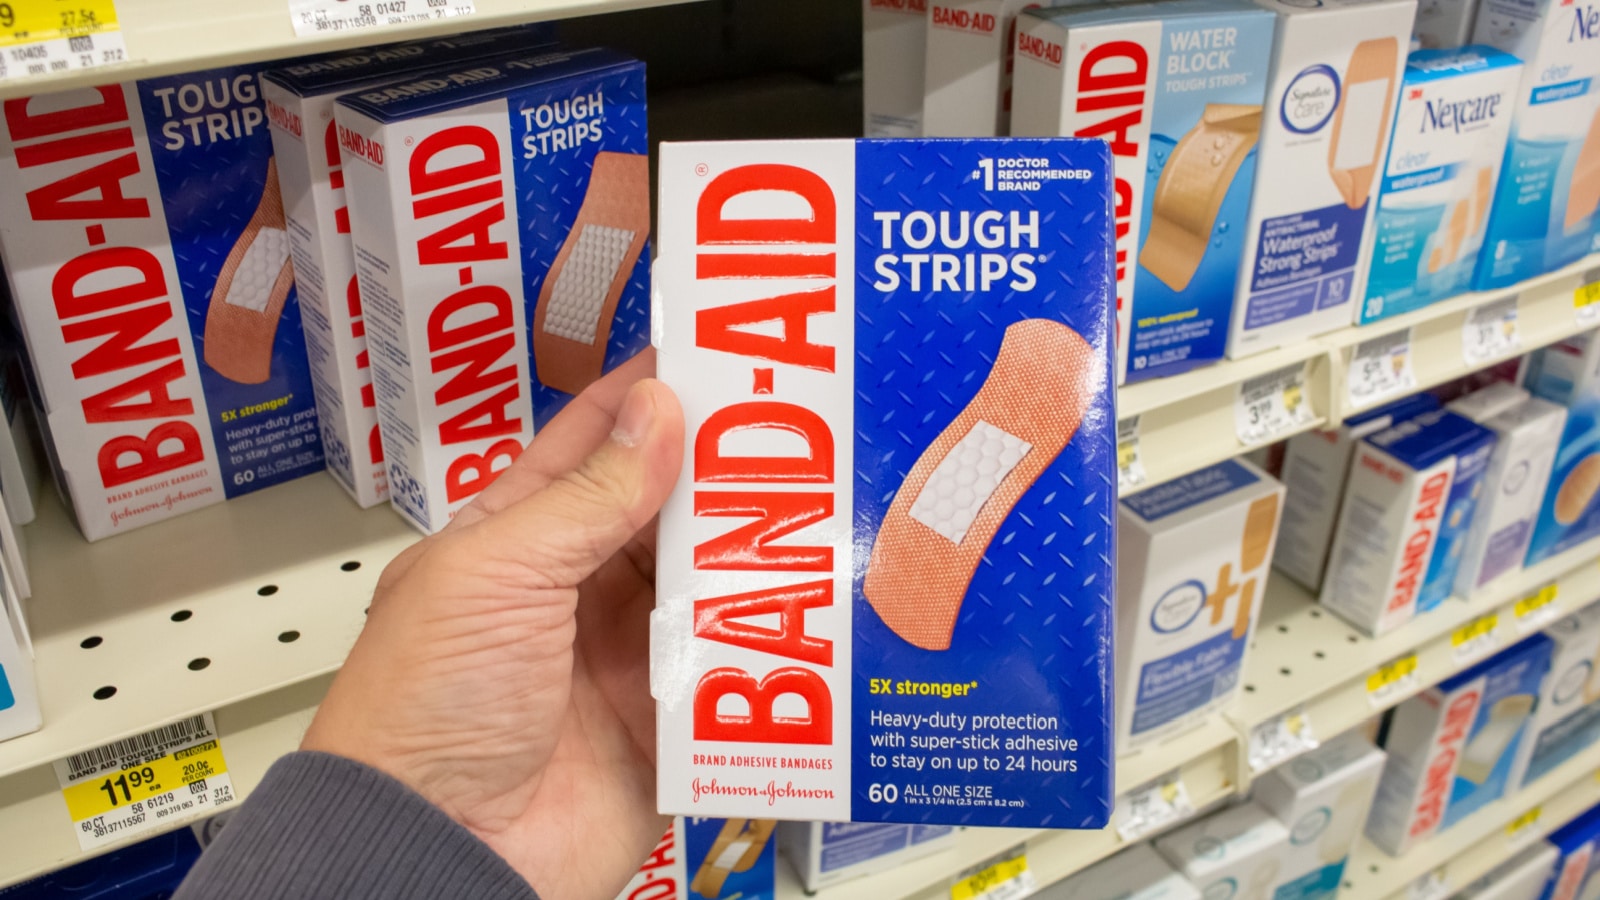 Los Angeles, California, United States - 02-01-2023: A view of a hand holding a package of Band-Aid bandages, on display at a local grocery store.